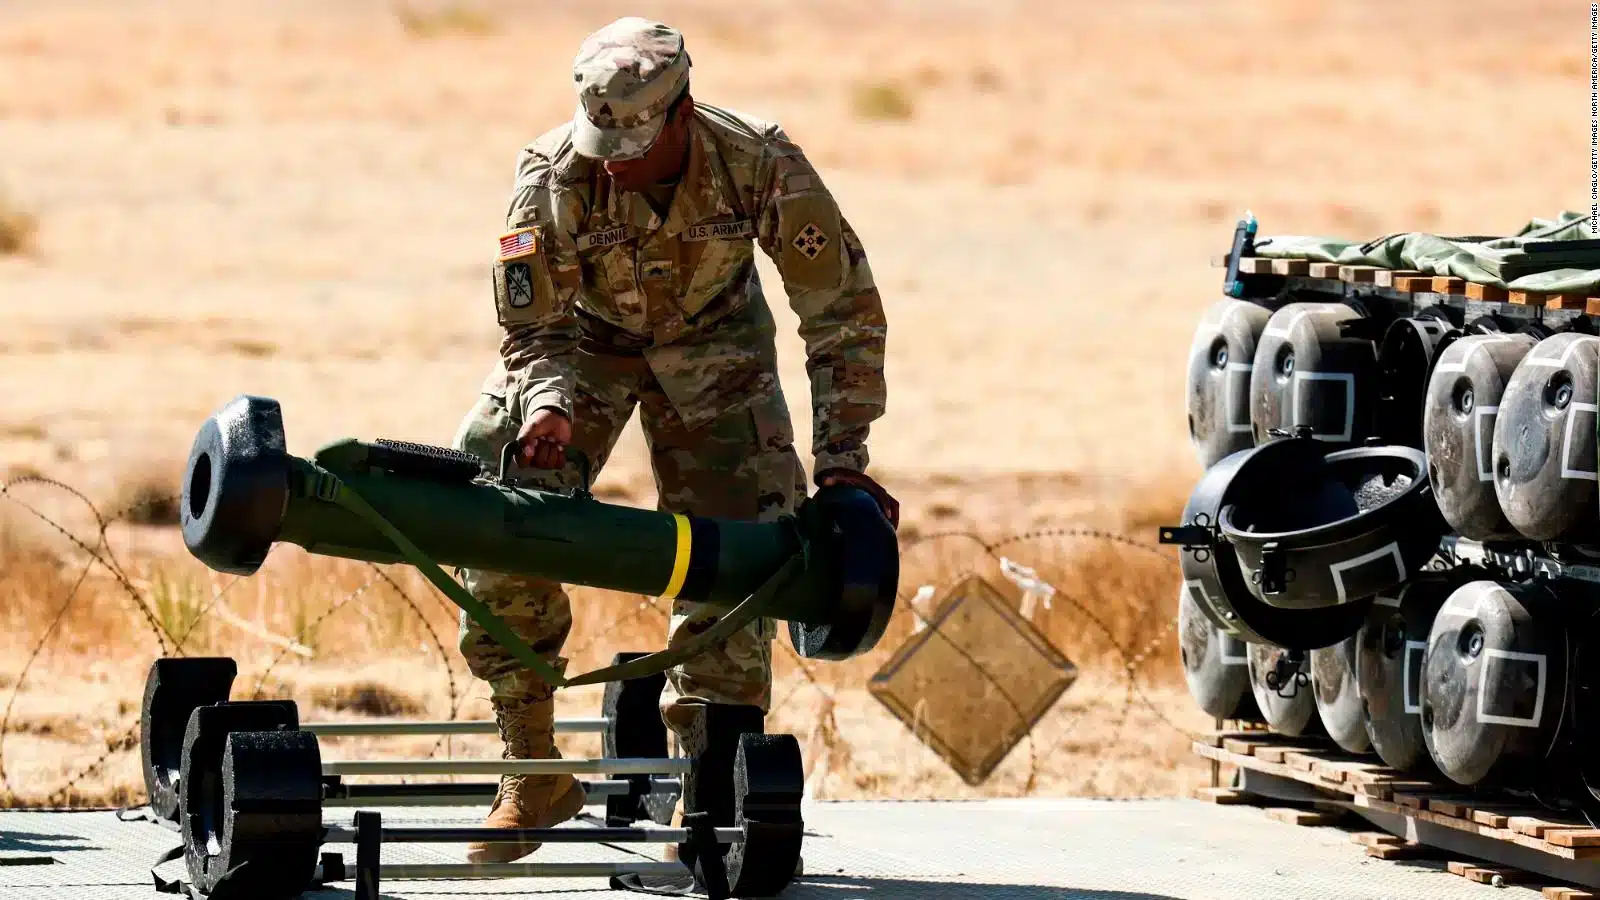 A US Army soldier with a Javelin missile. Photo: Getty Images.